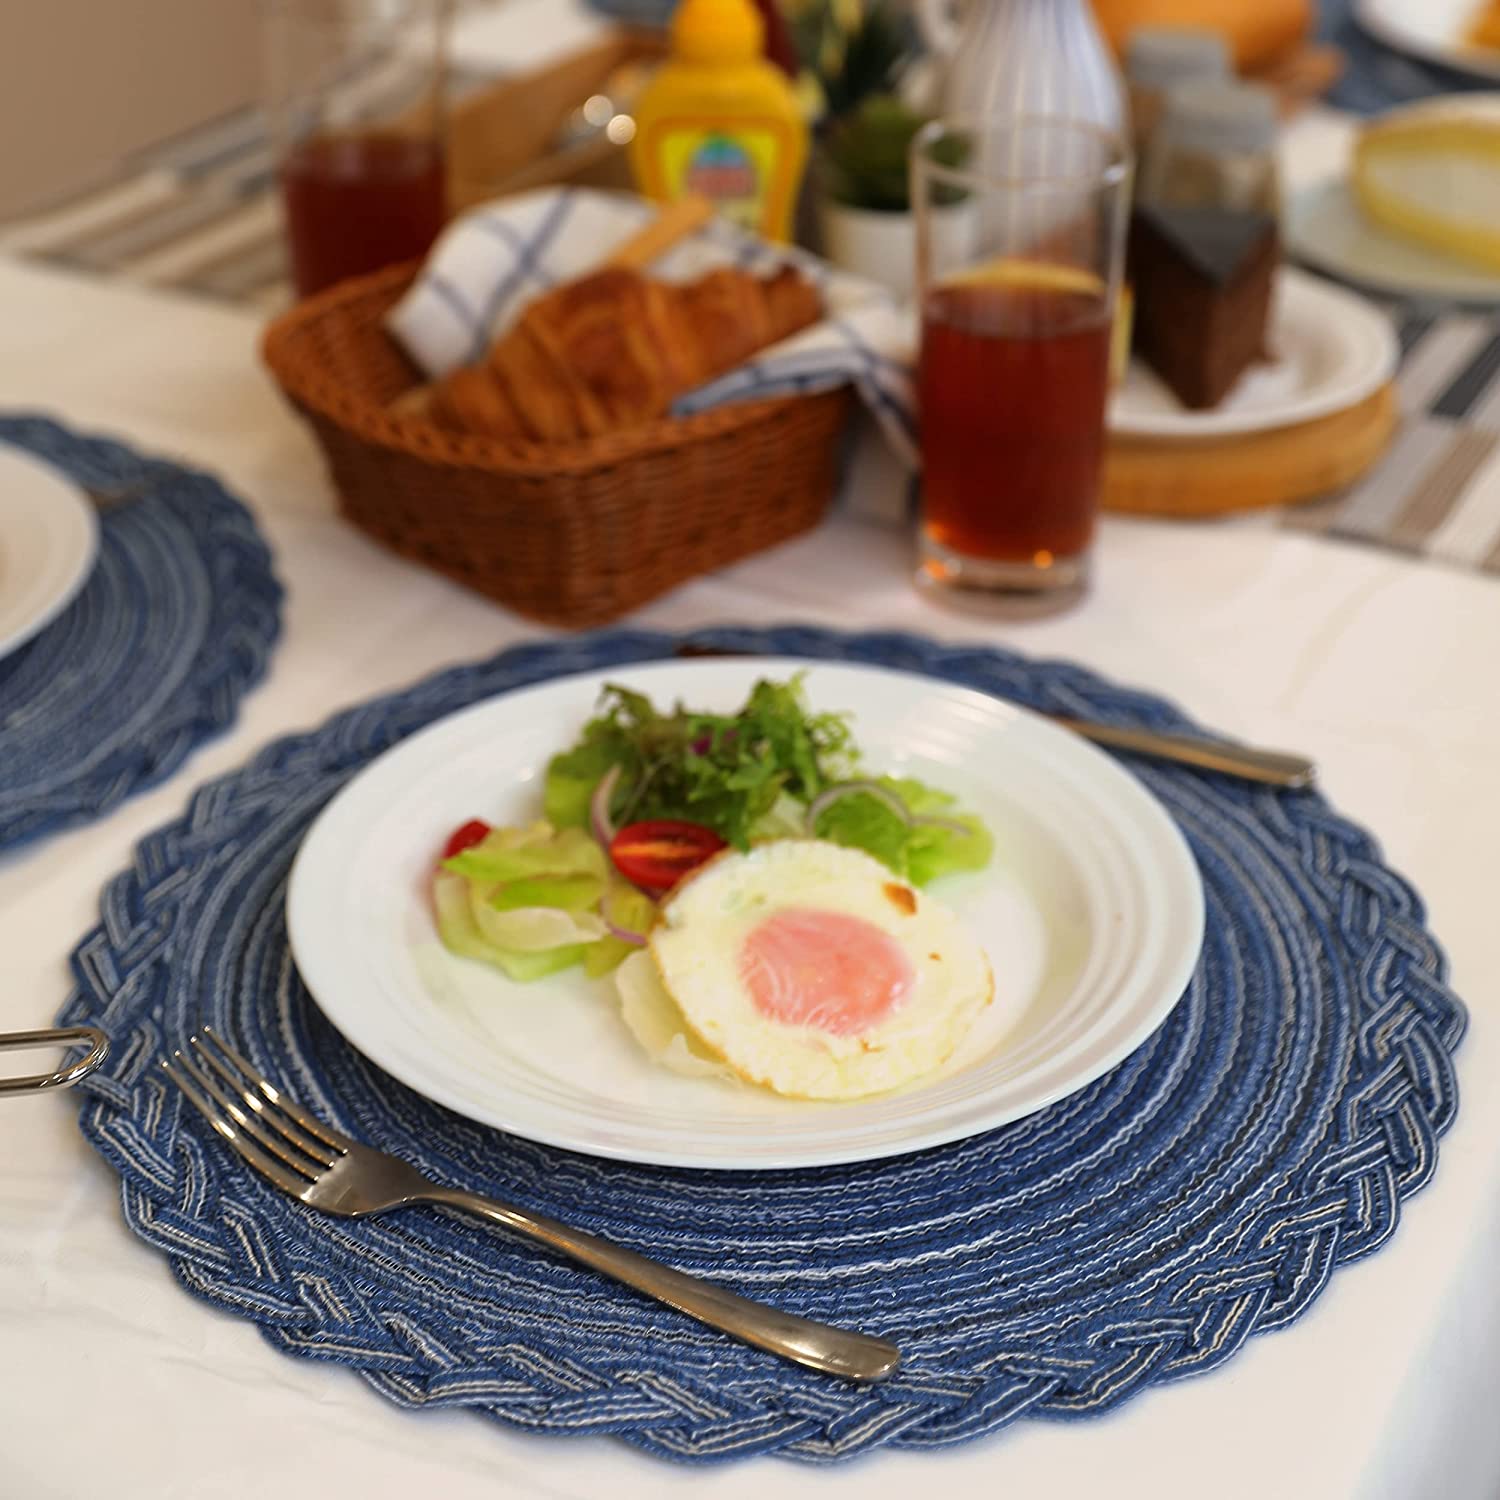 Round Braided Woven Placemats